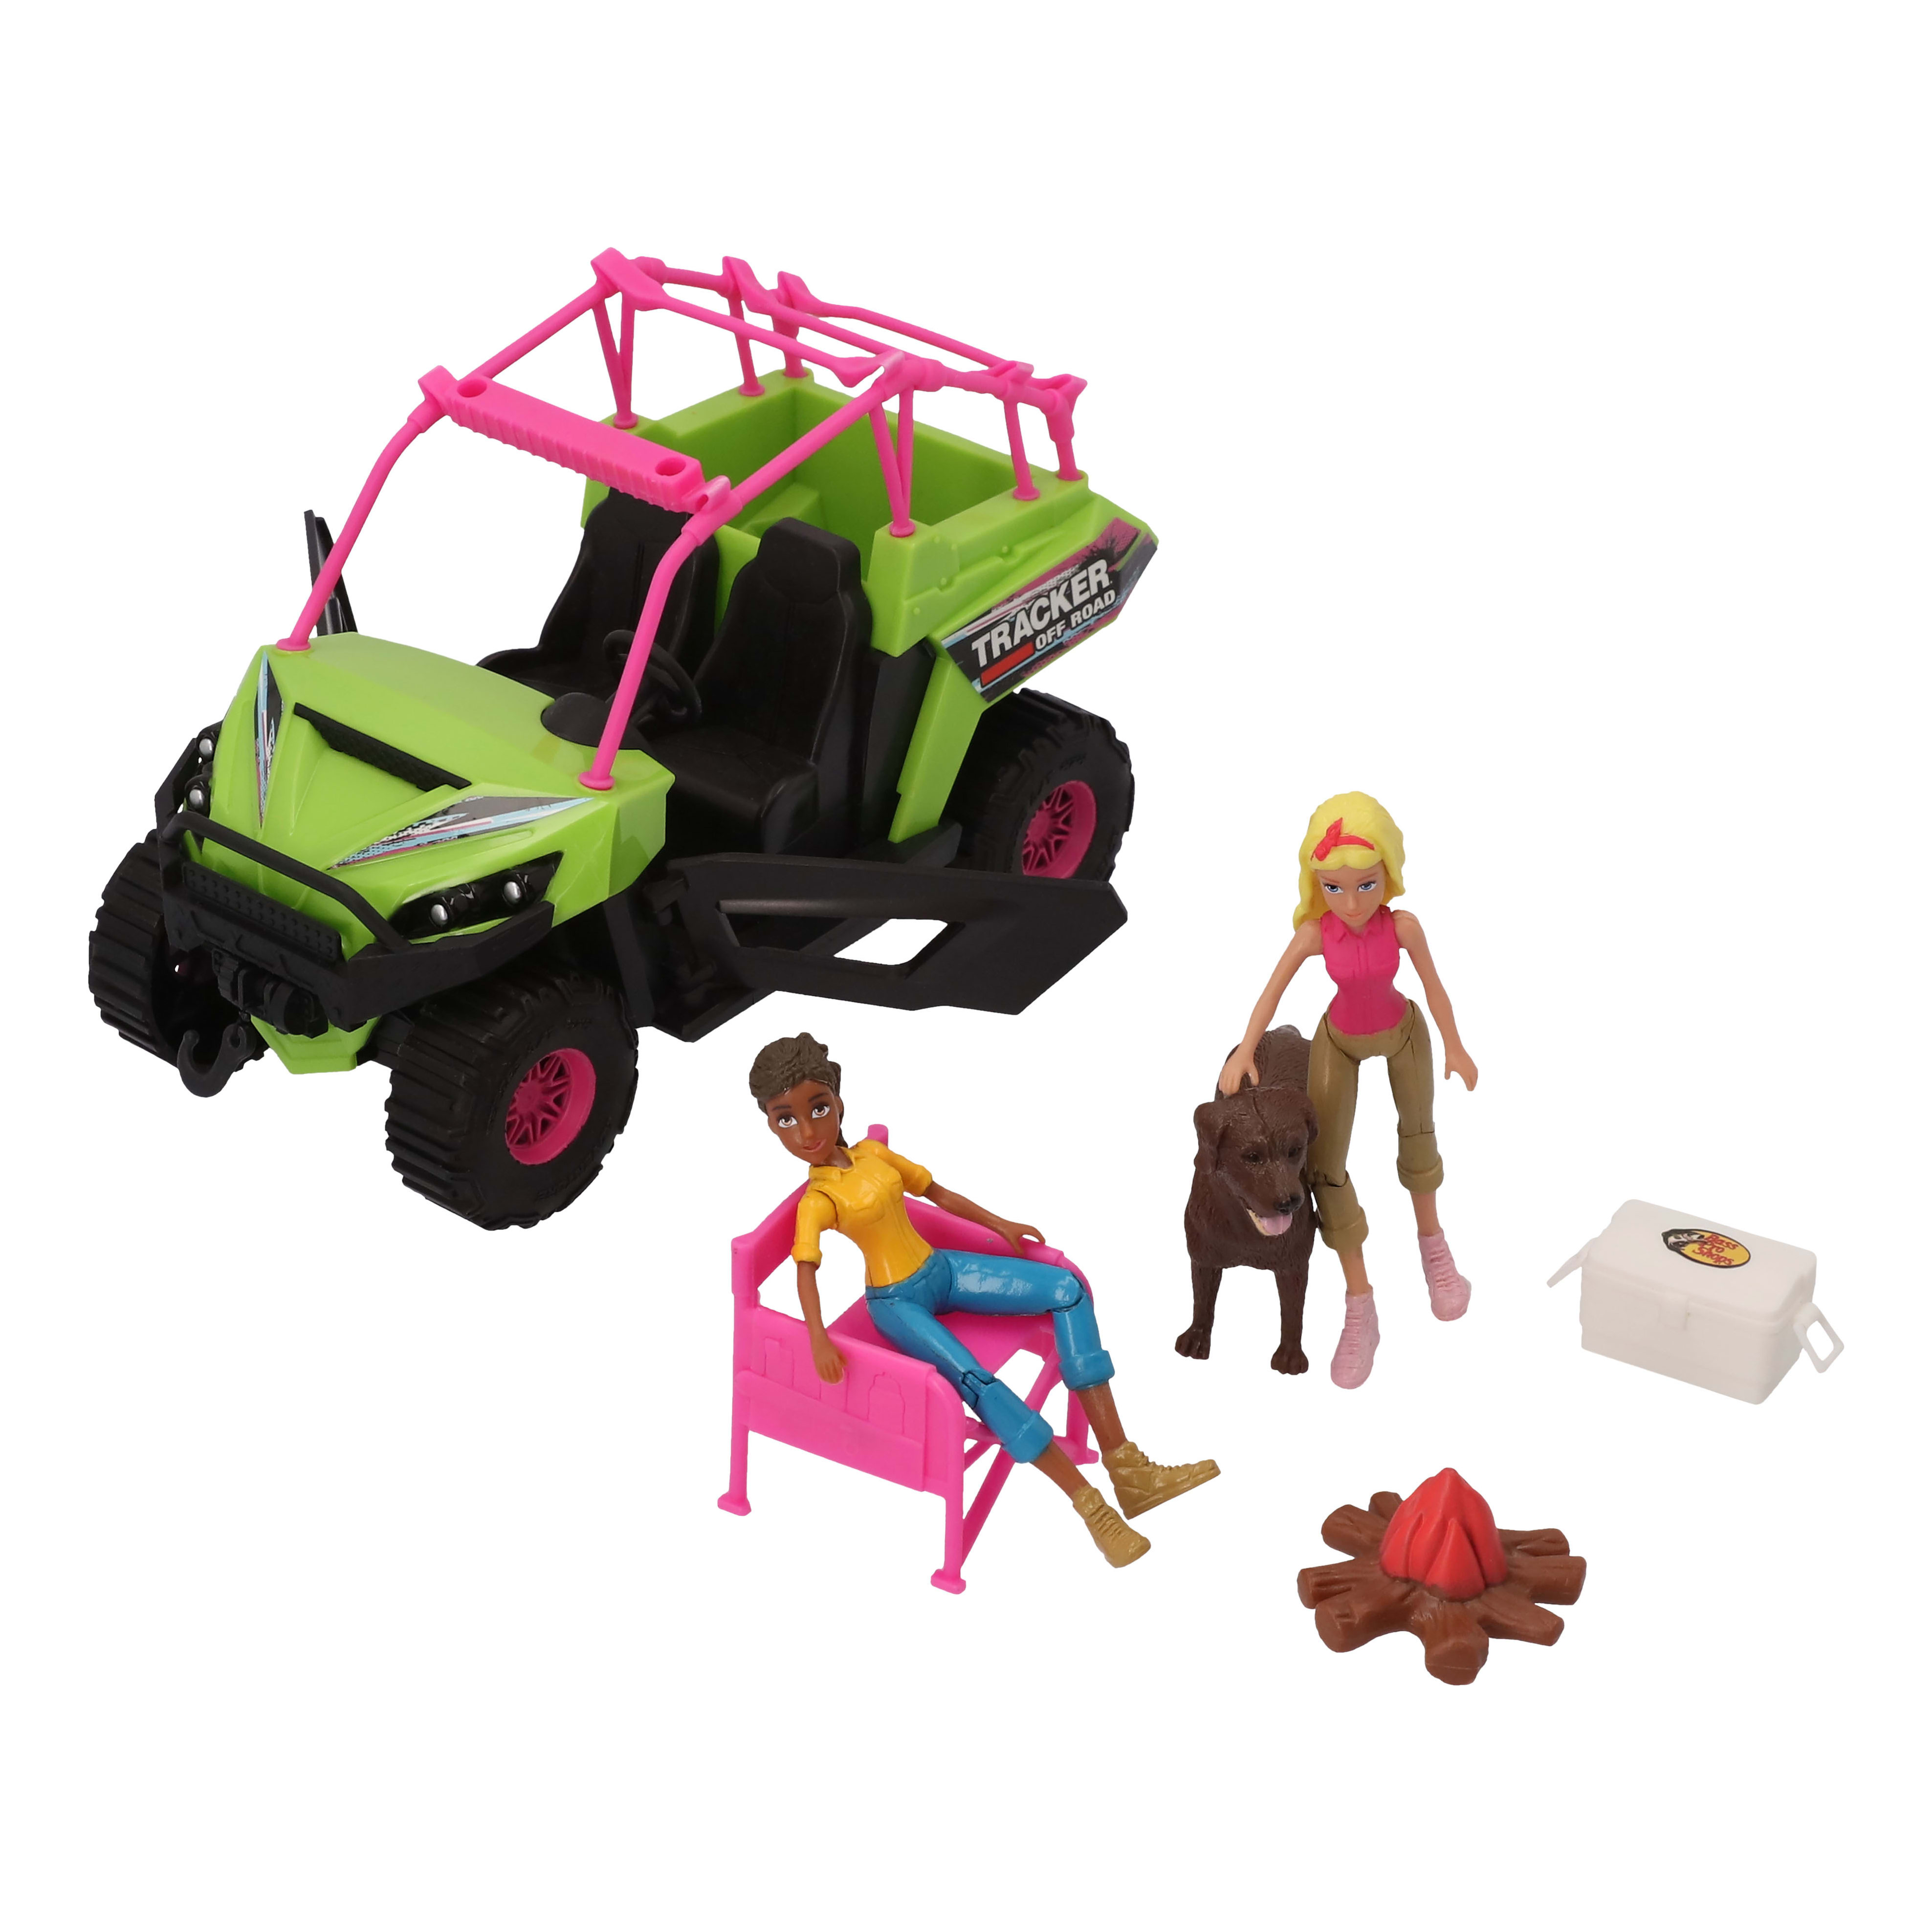 Bass Pro Shops® Her Imagination Adventure Side-by-Side Play Set